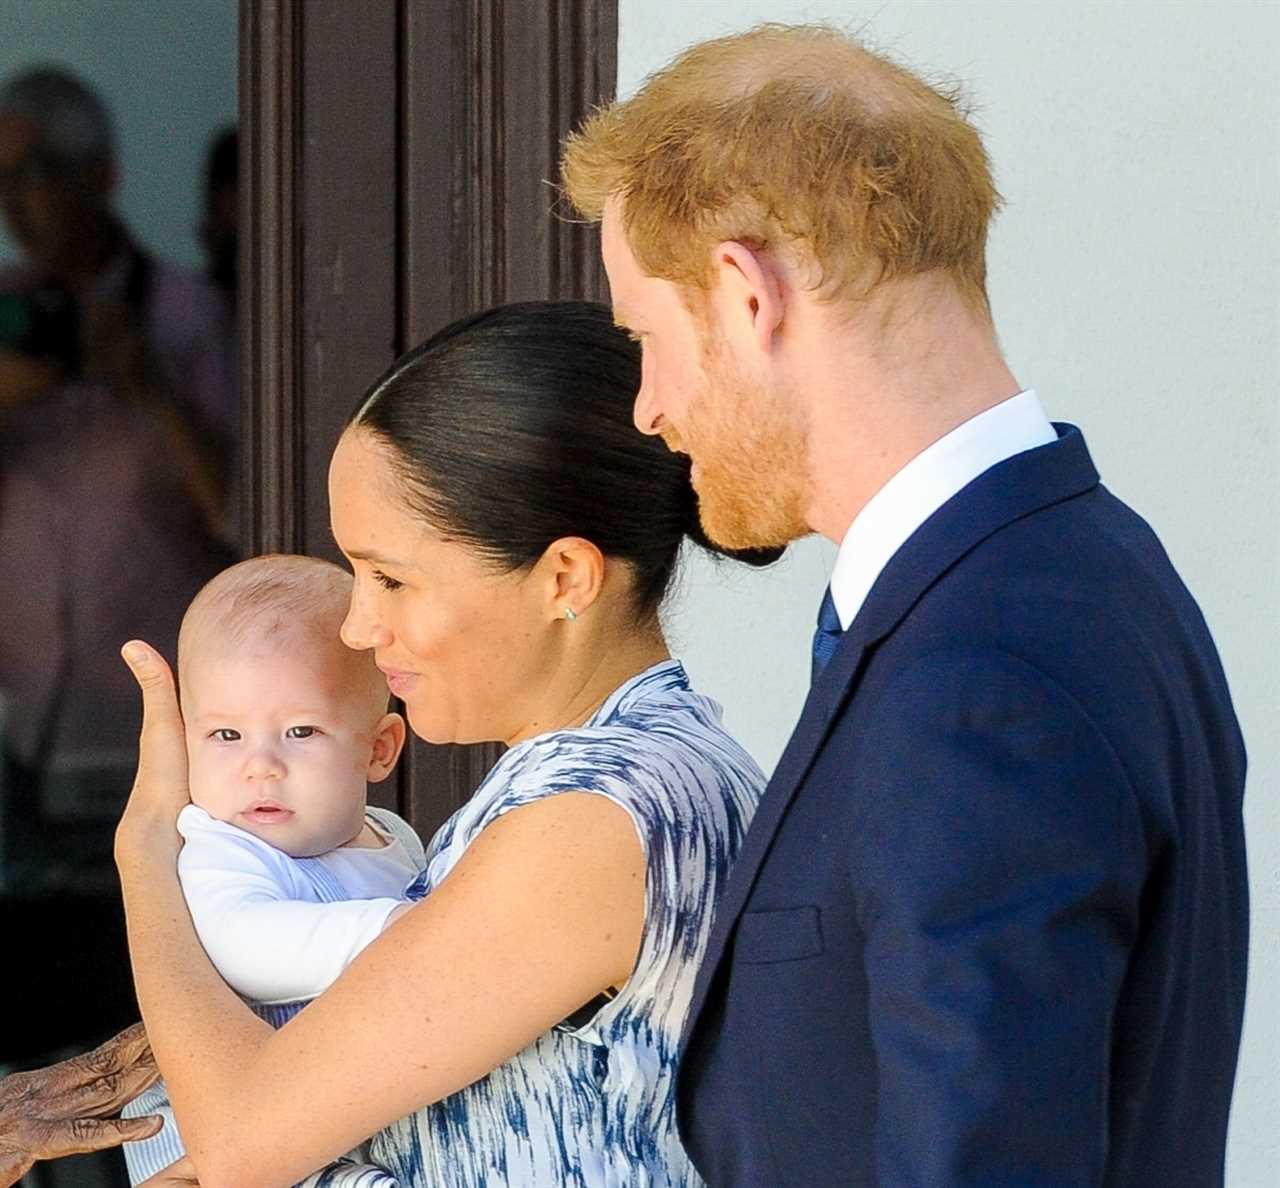 Inside Archie’s ‘low key’ birthday party from homemade cake to celeb guests as Meghan Markle ‘wanted to minimise drama’